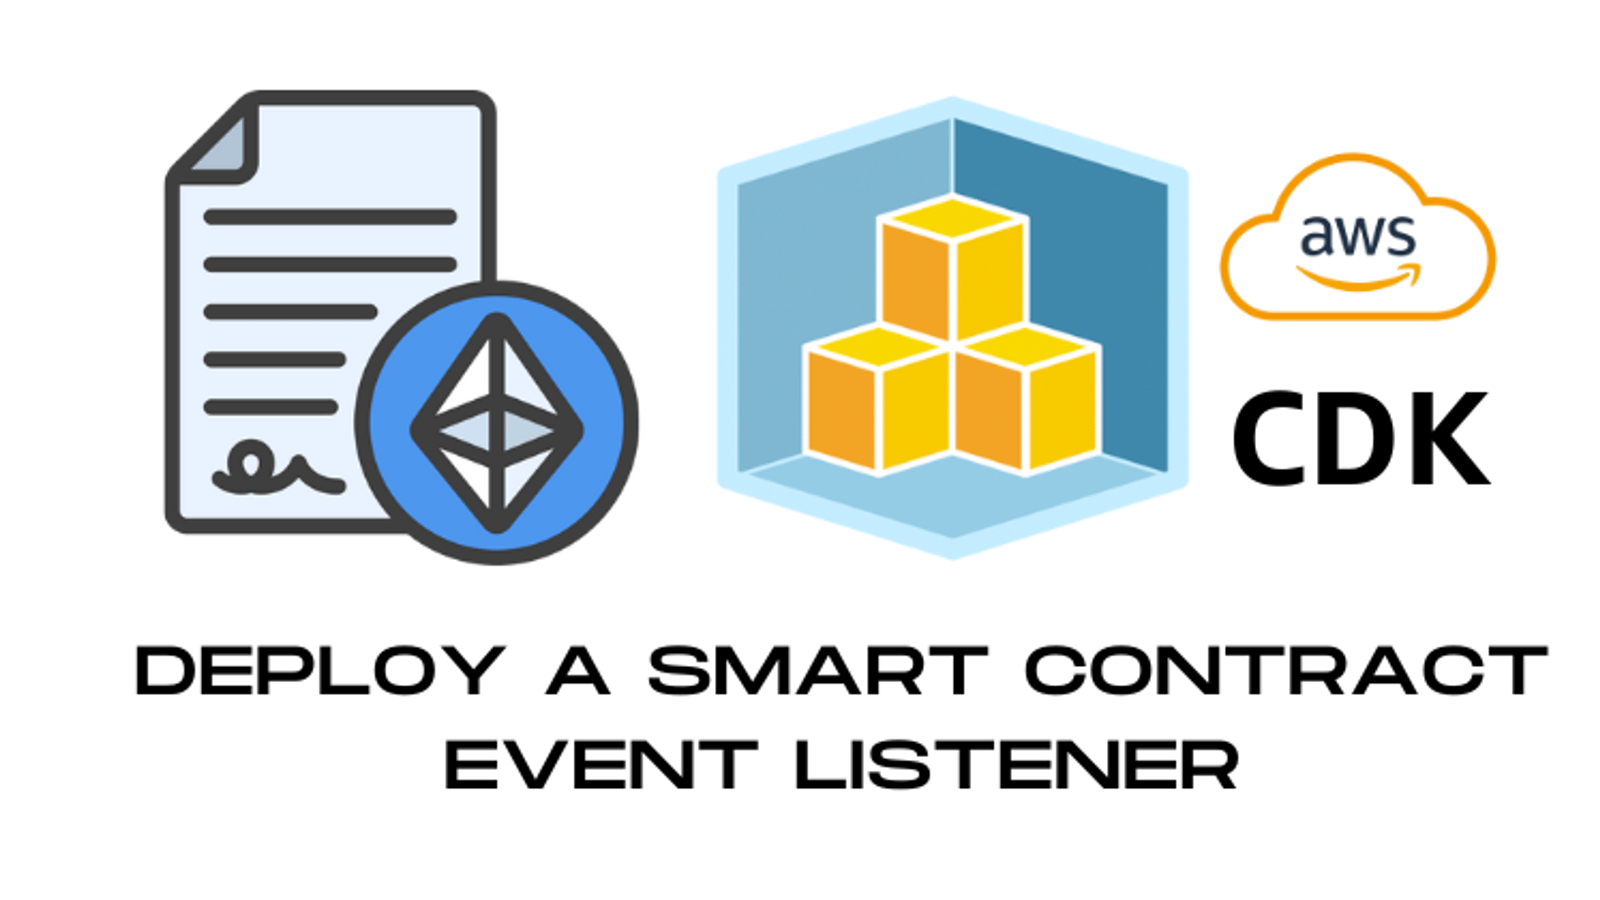 GitHub - AleG94/ethereum-events: Efficient and reliable event listener for Ethereum